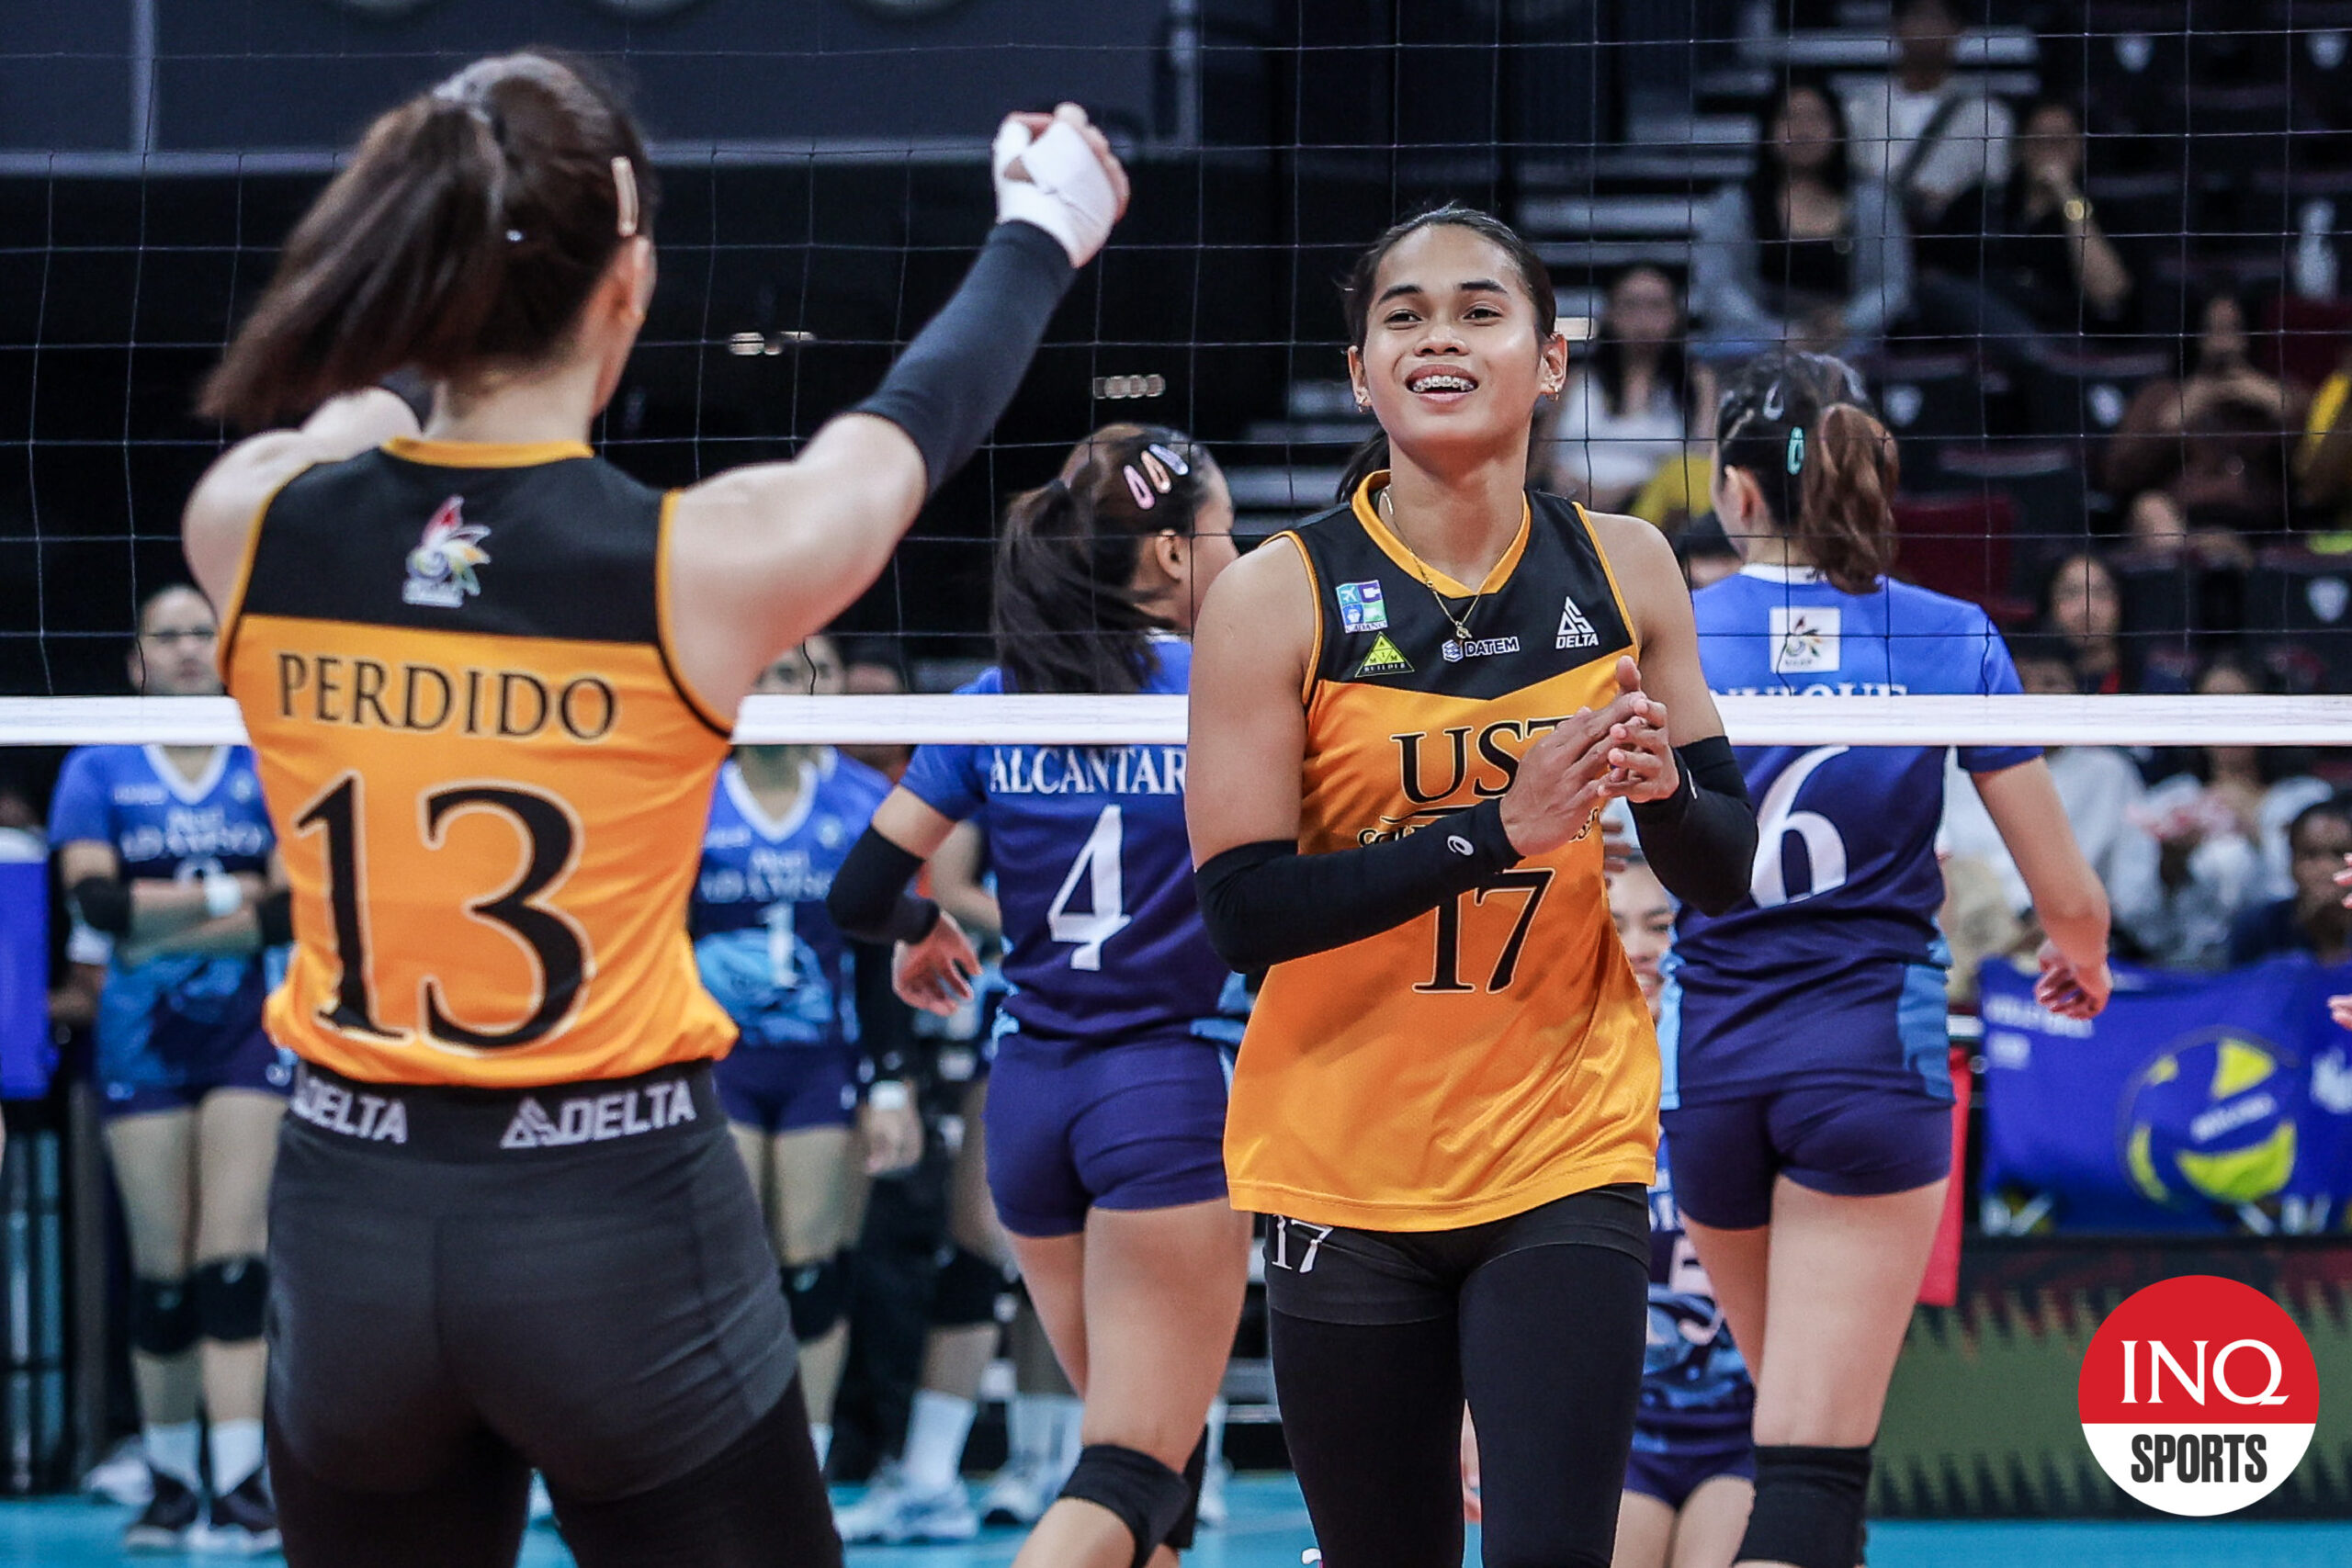 UST Tigresses' Angeline Poyos UAAP volleyball